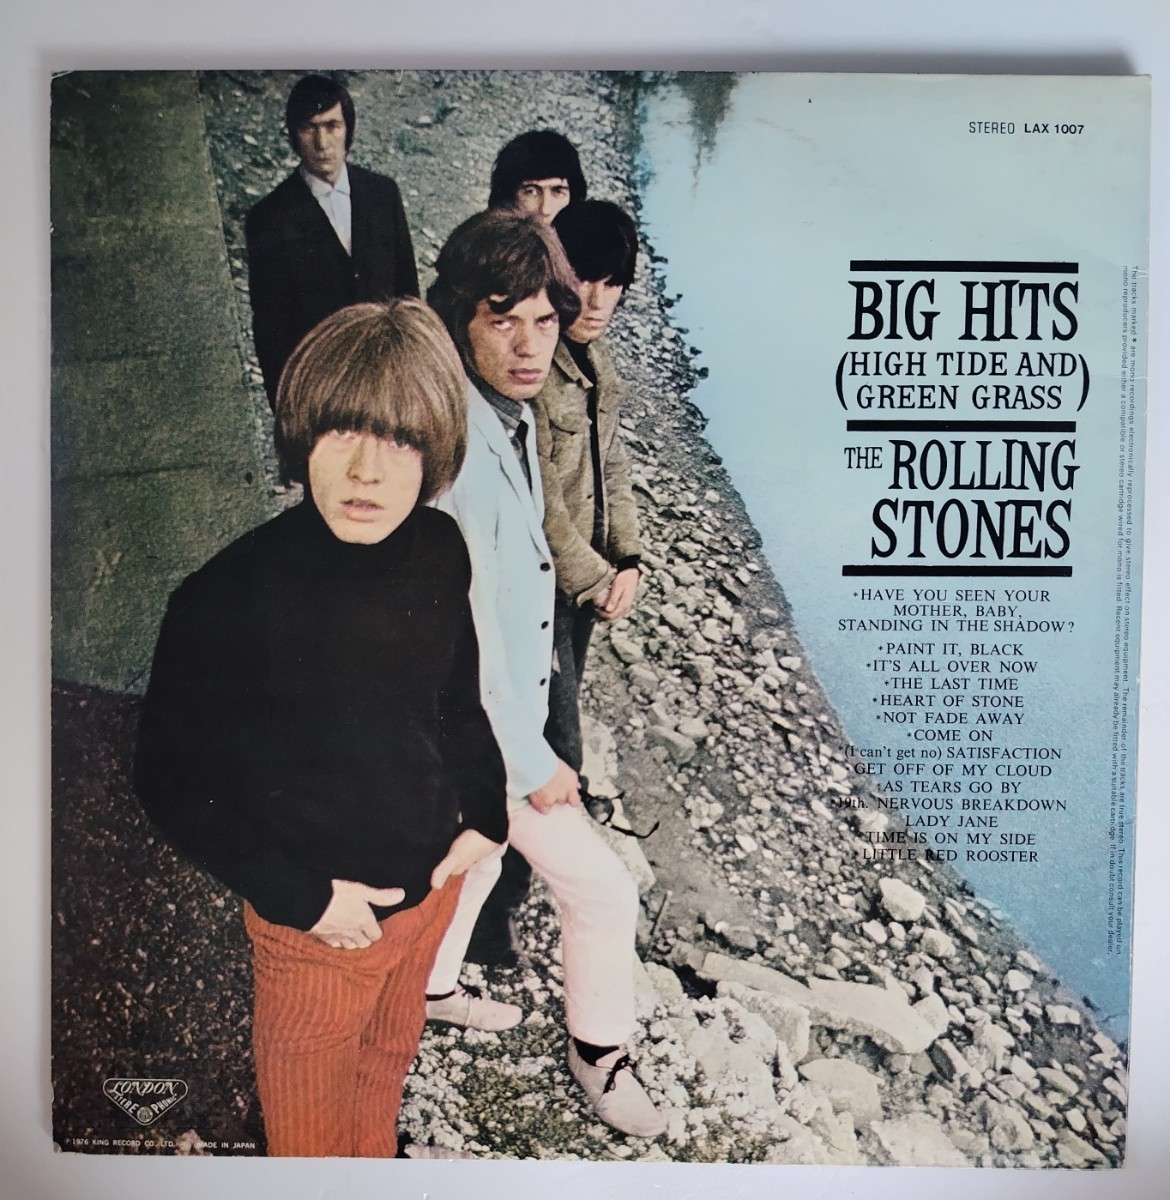 The Rolling Stones Big Hits [High Tide And Green Grass/1976年LAX-1007 ローリング・ストーンズワンオーナー保管品_画像2